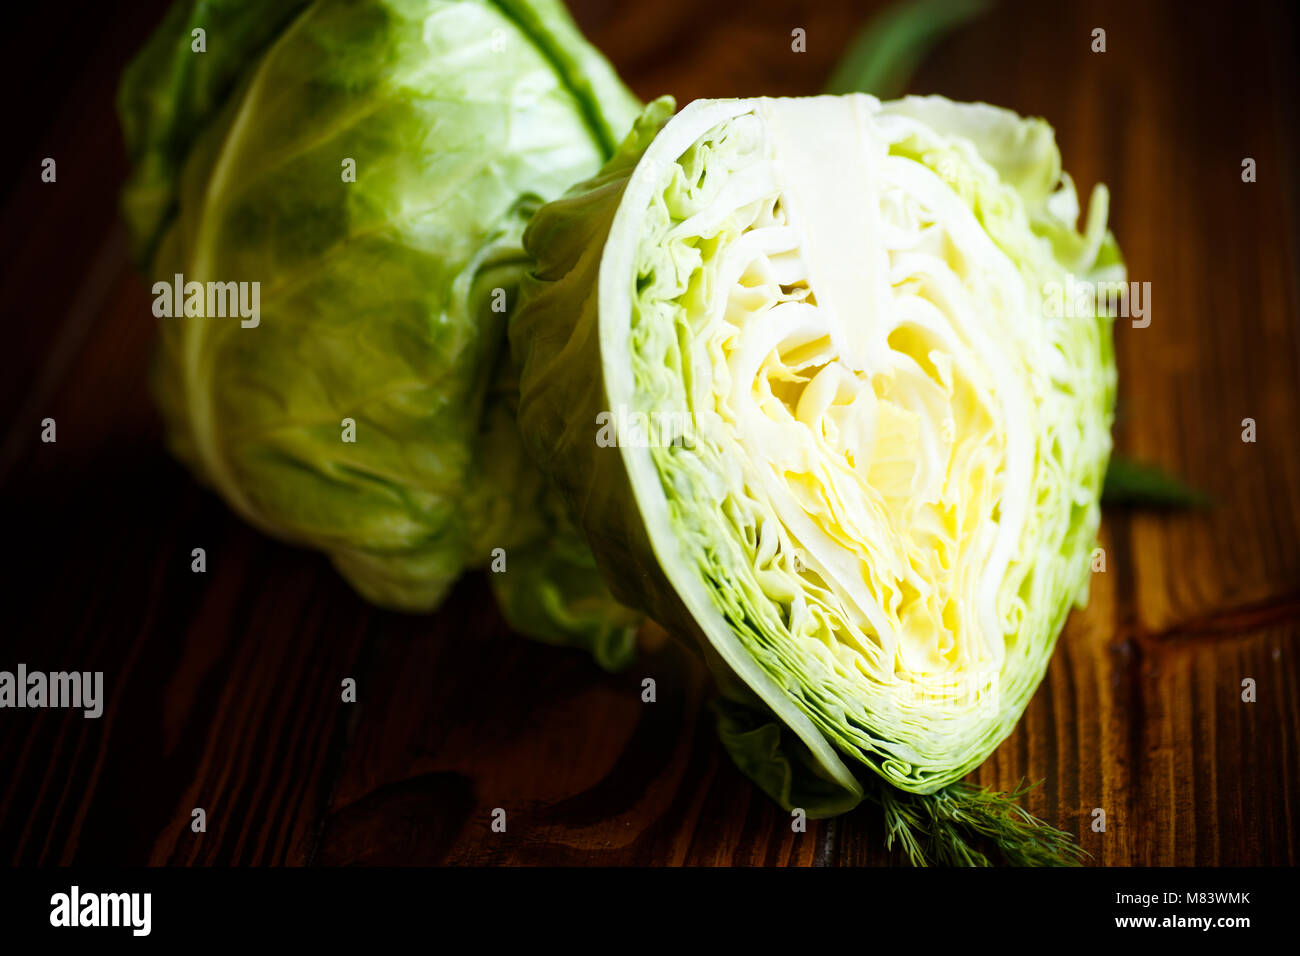 cabbage young green Stock Photo